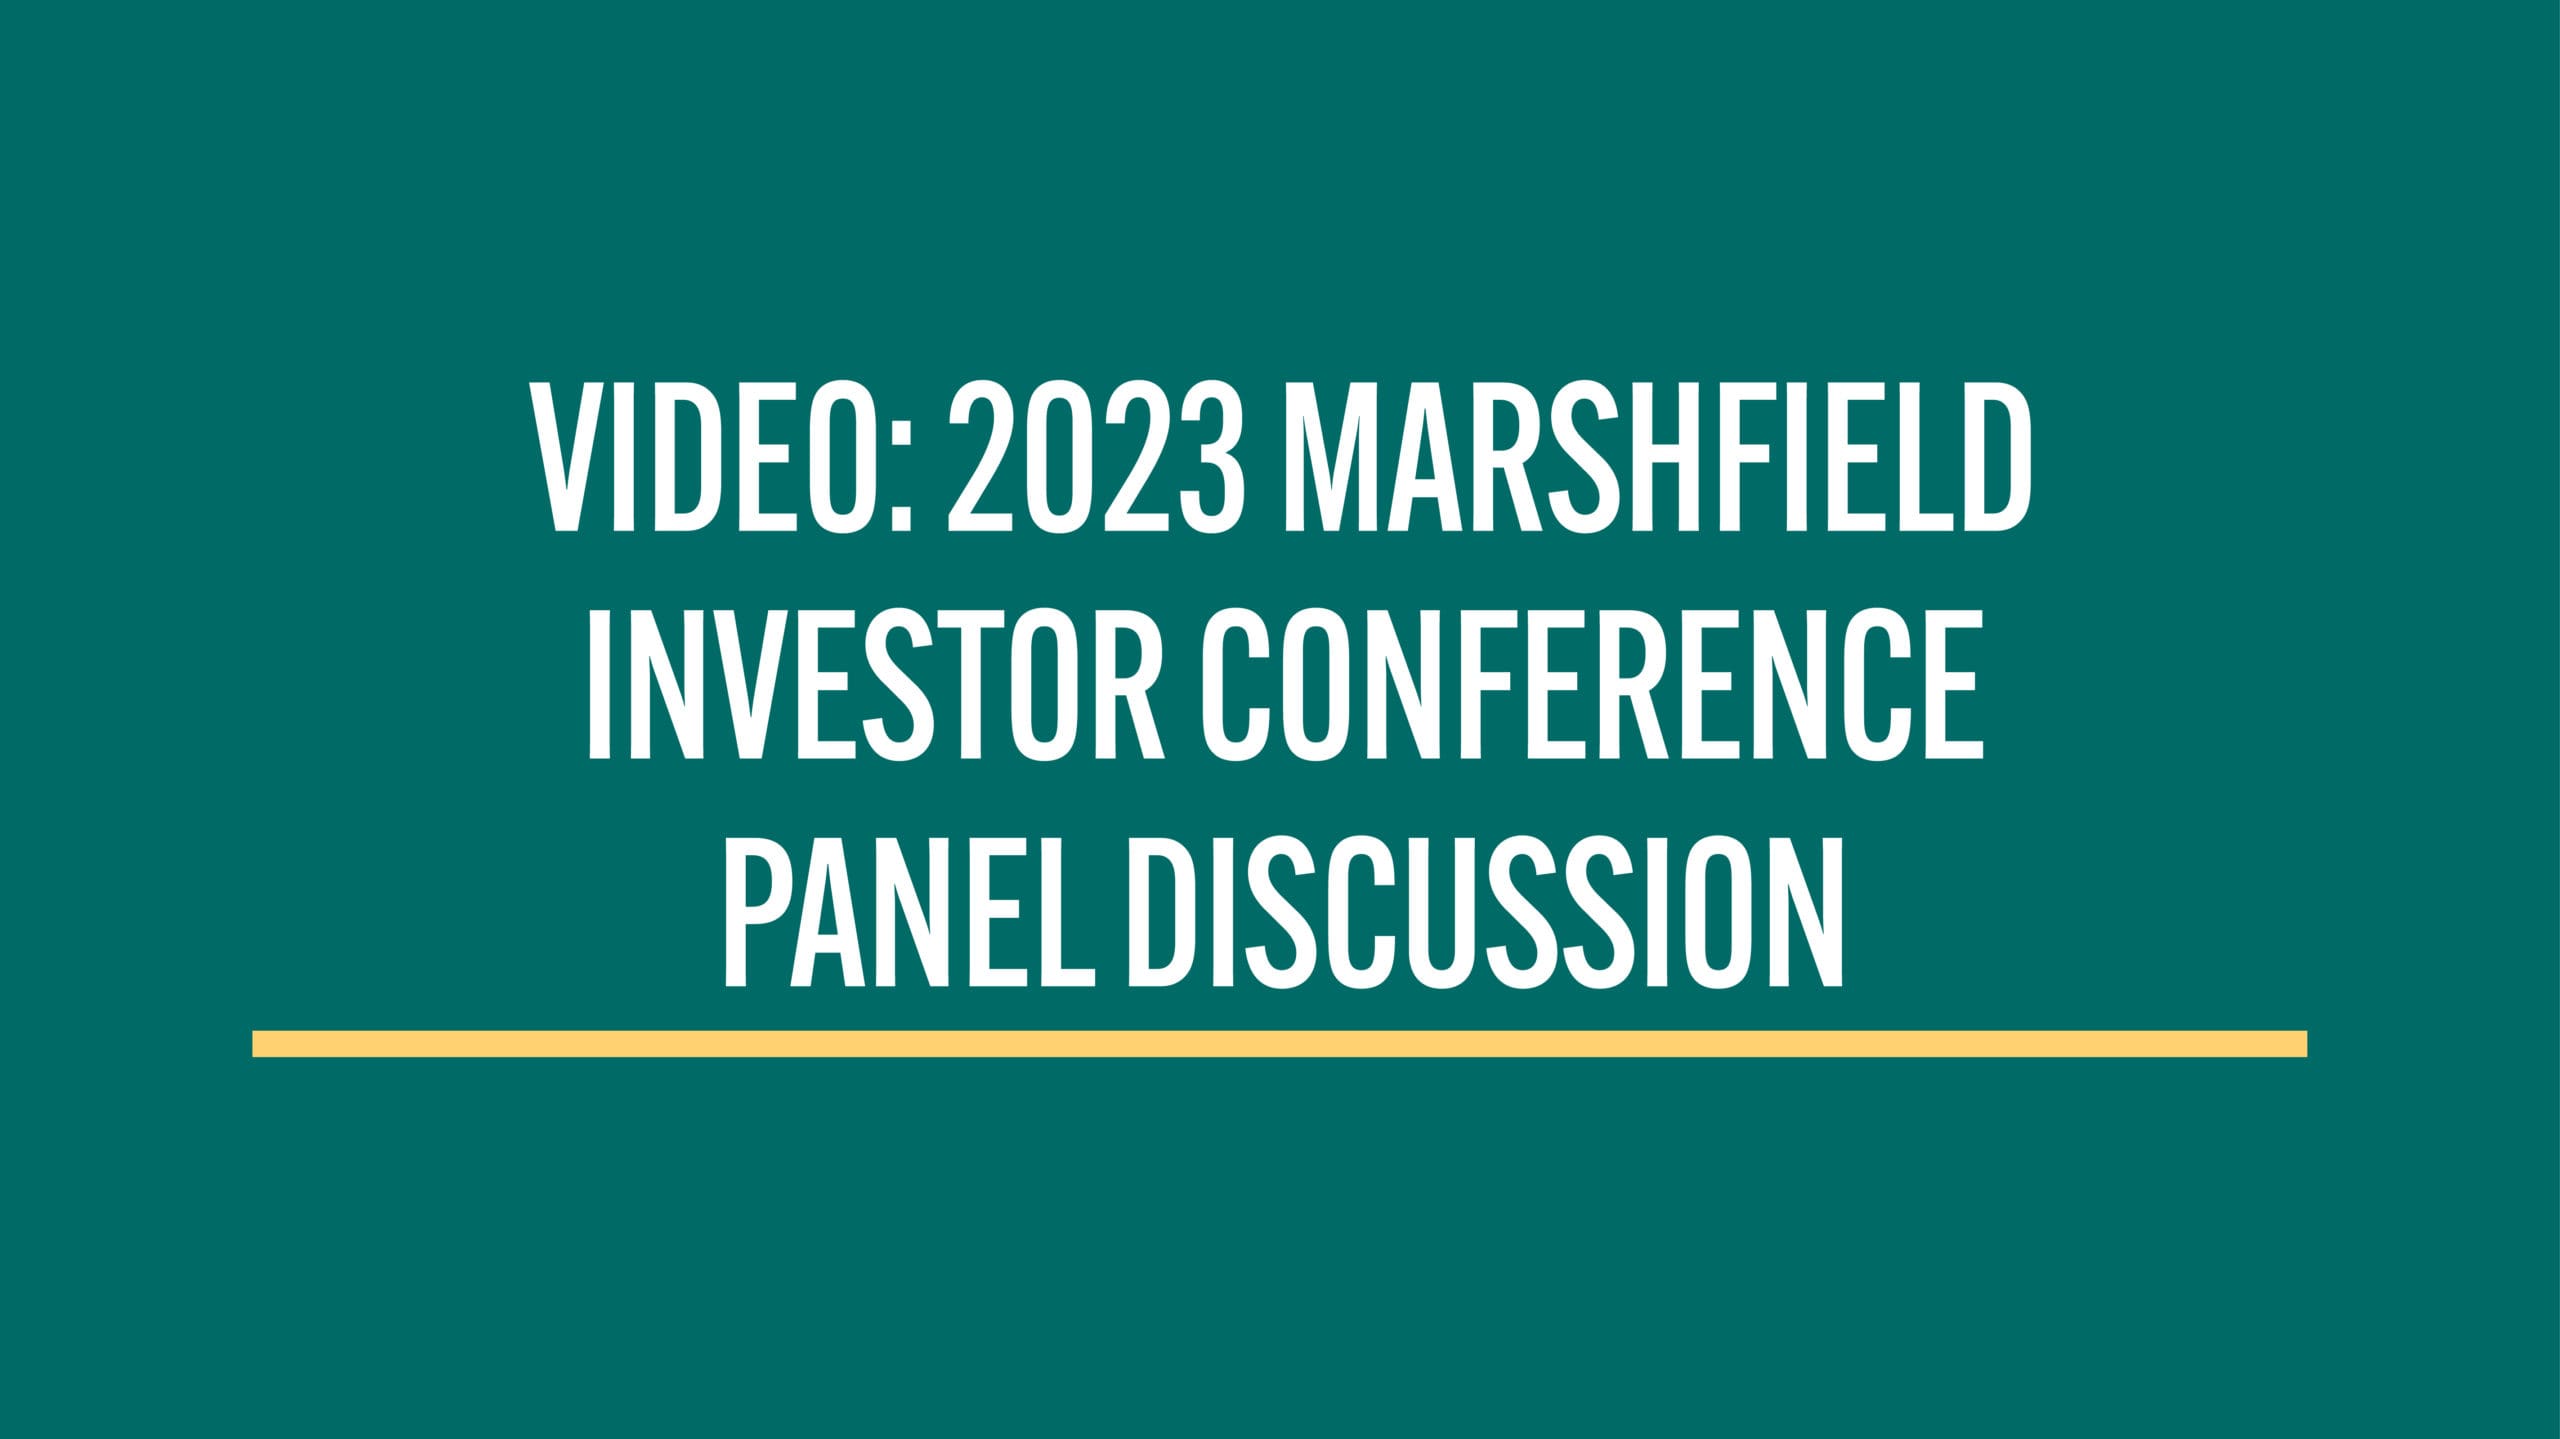 2023 Marshfield Investor Conference Panel Discussion